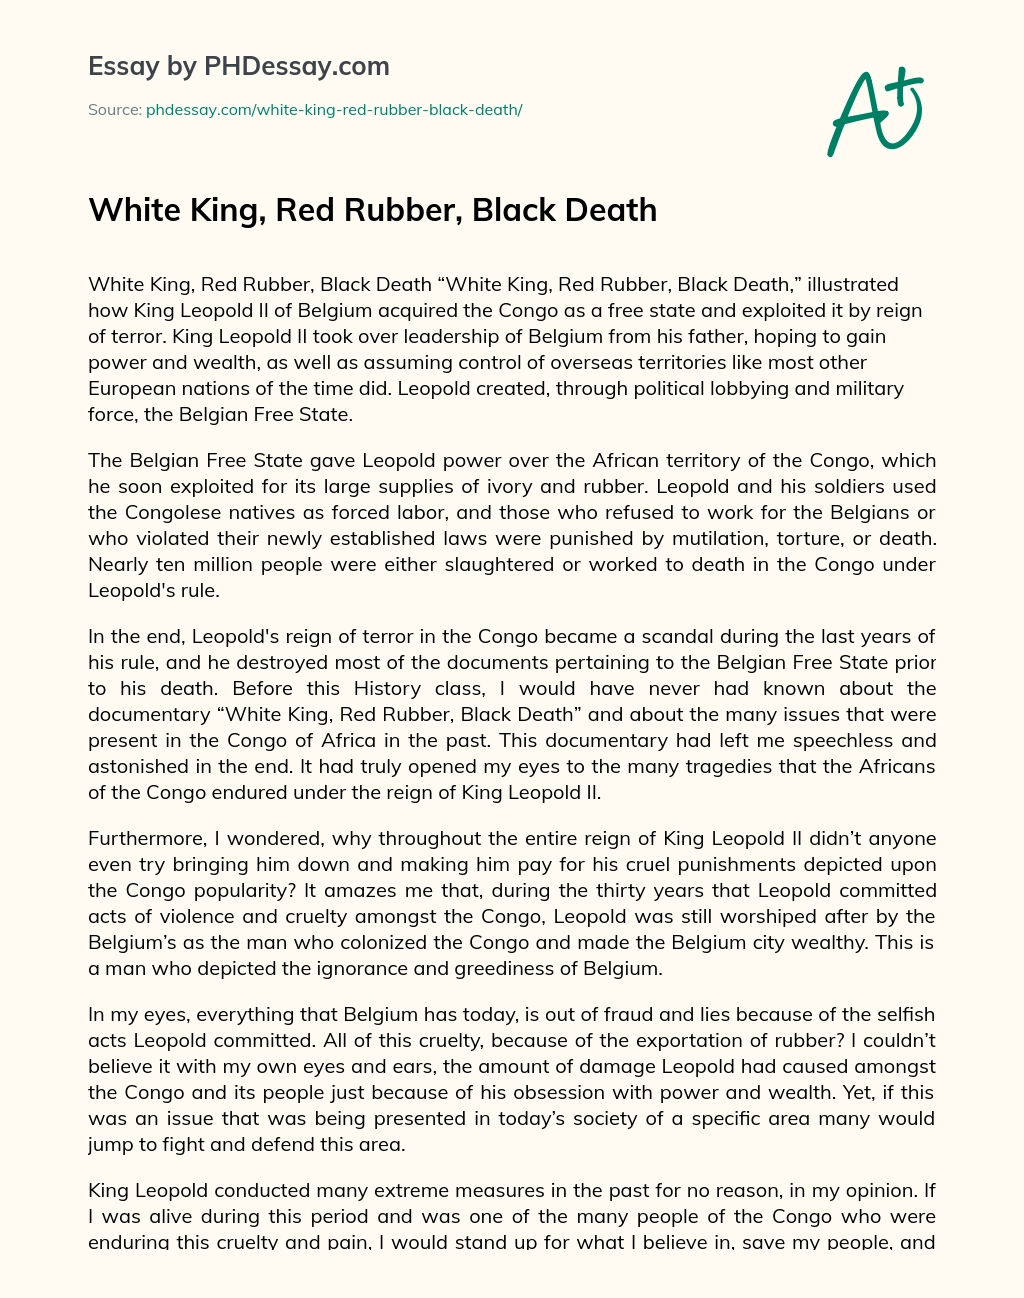 White King, Red Rubber, Black Death essay